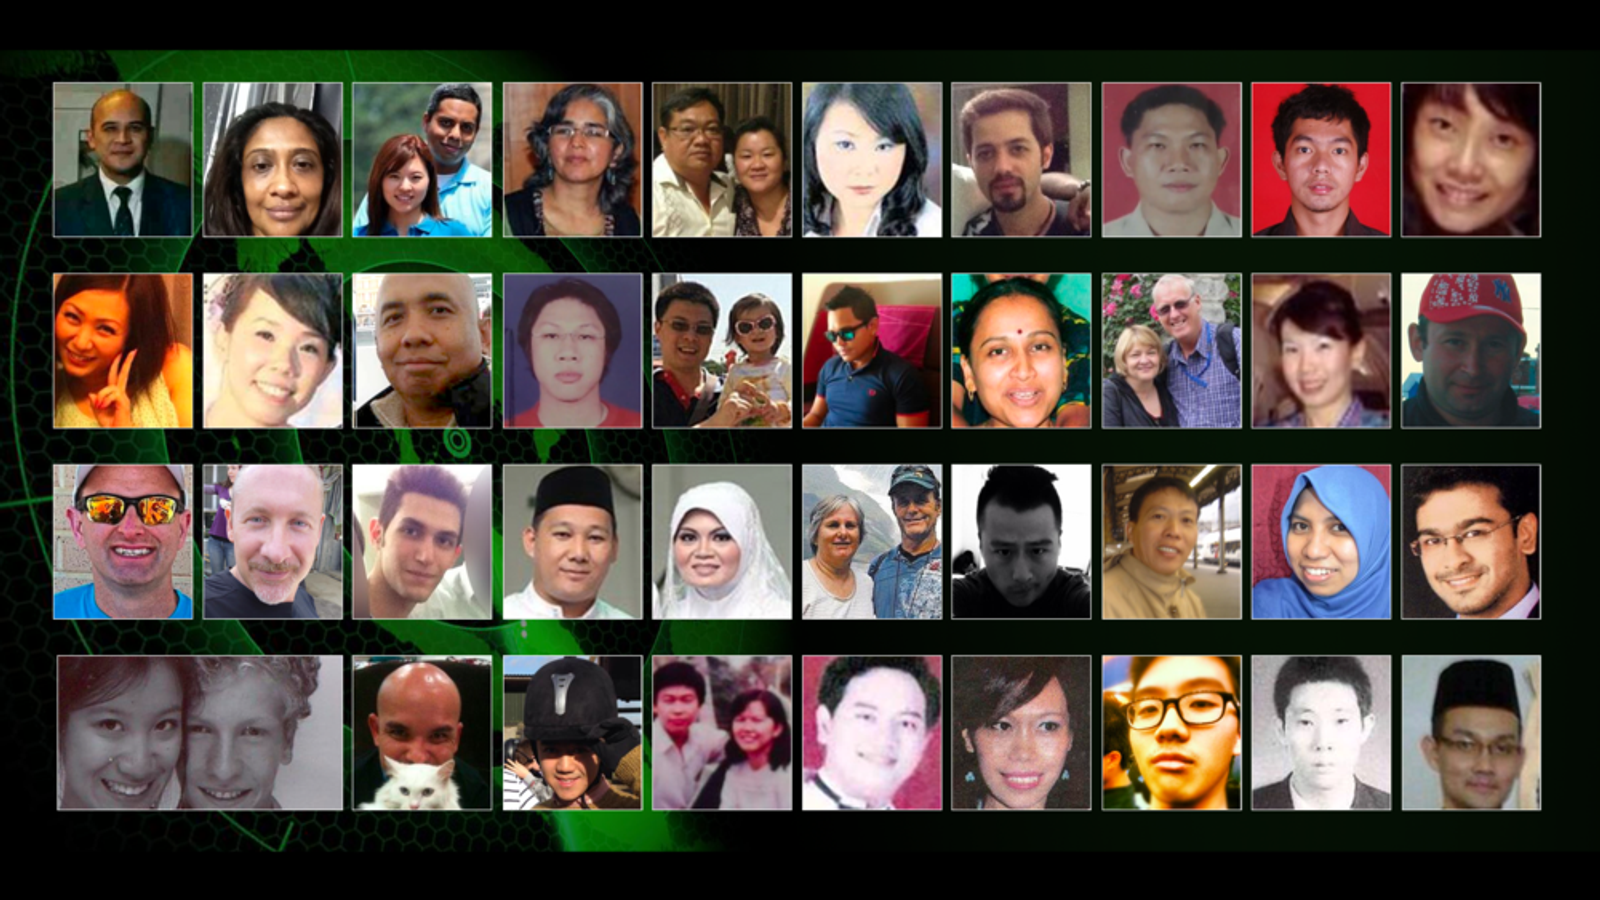 Missing Plane Mystery Faces Of Flight MH370